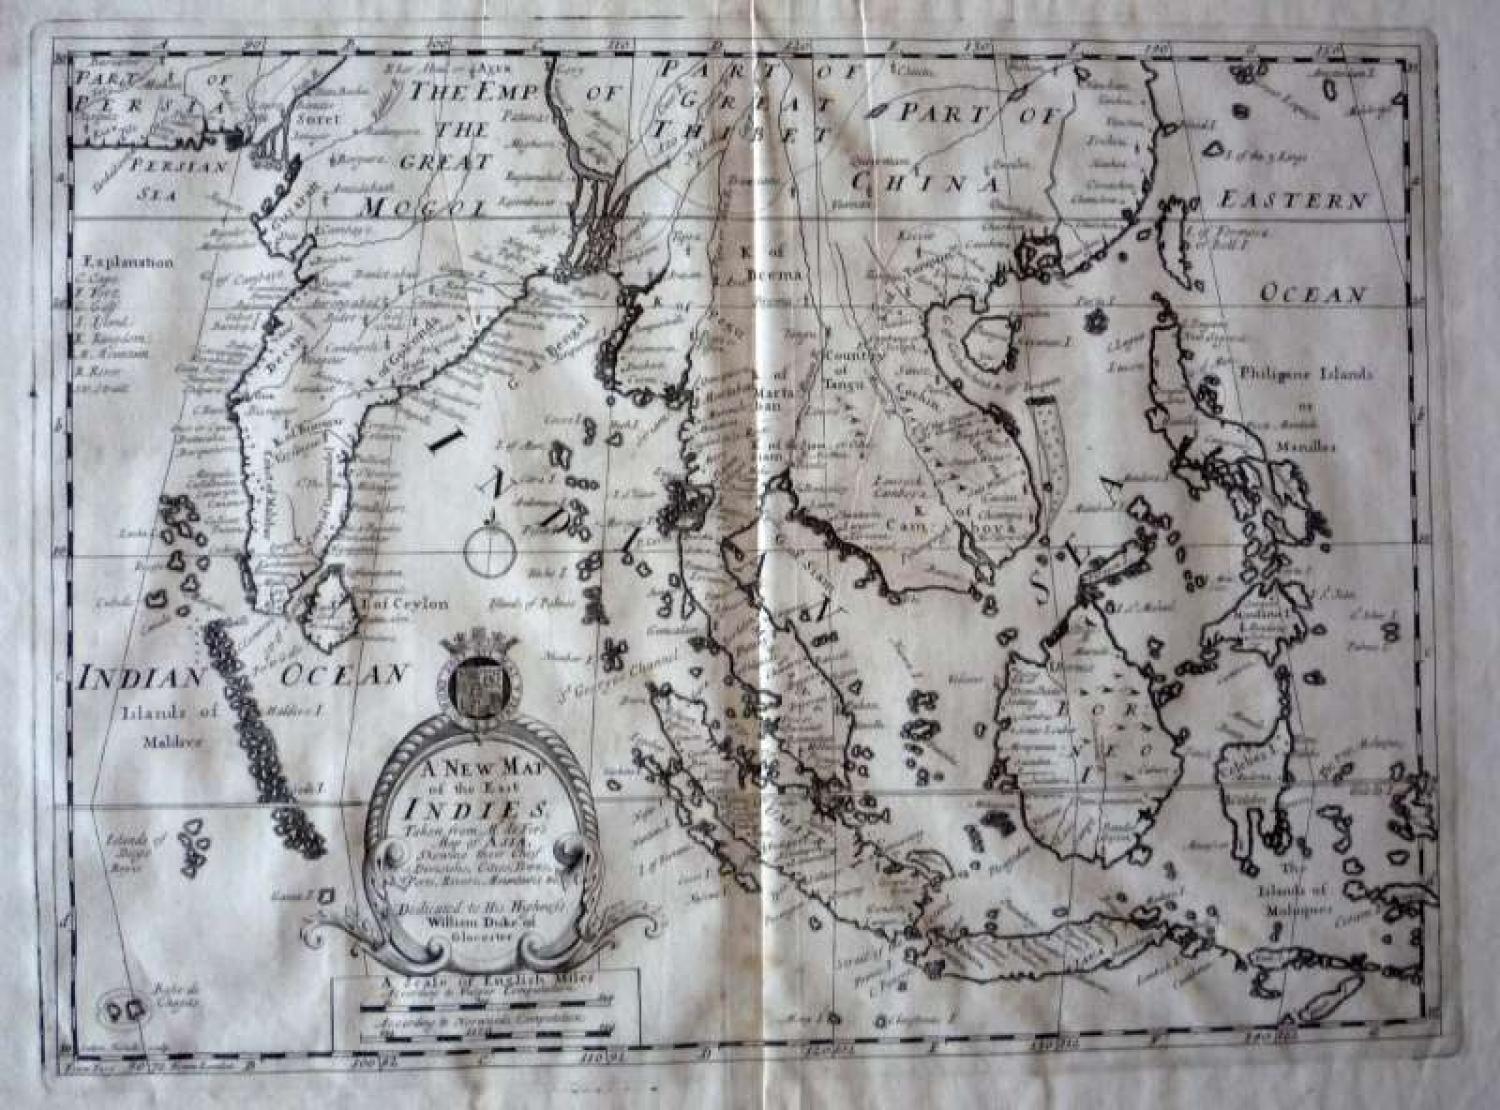 RESERVED A New Map of the East Indies...